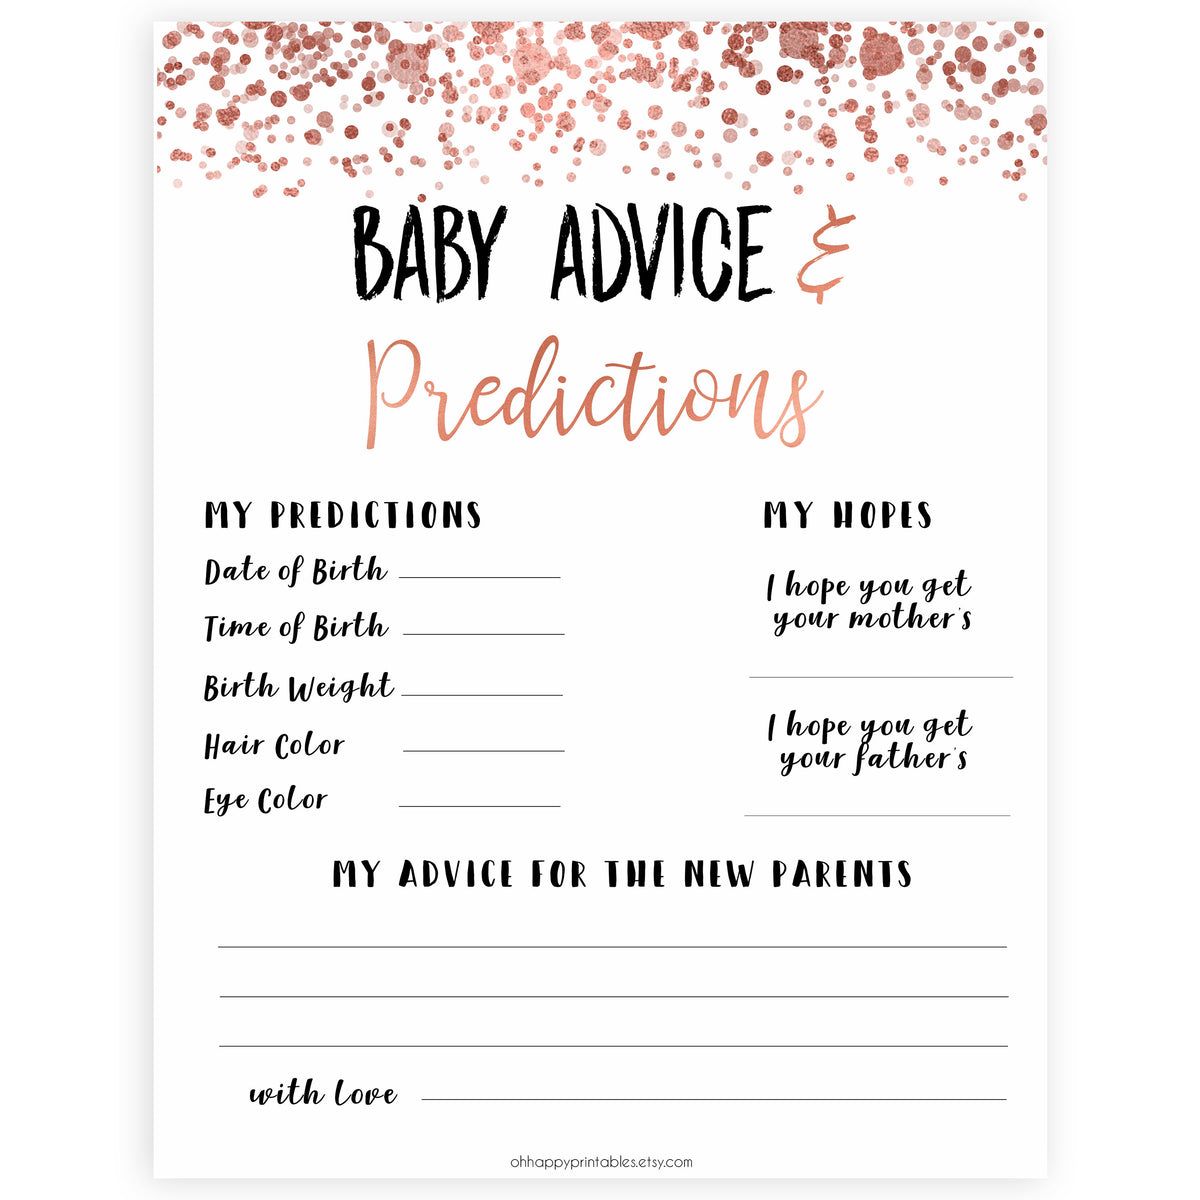 Rose Gold Baby Advice & Predictions, Advice for New Parents, Baby Advice Printable, Rose Gold Baby Shower, New Baby Predictions, printable baby shower games, fun baby shower games, popular baby shower games